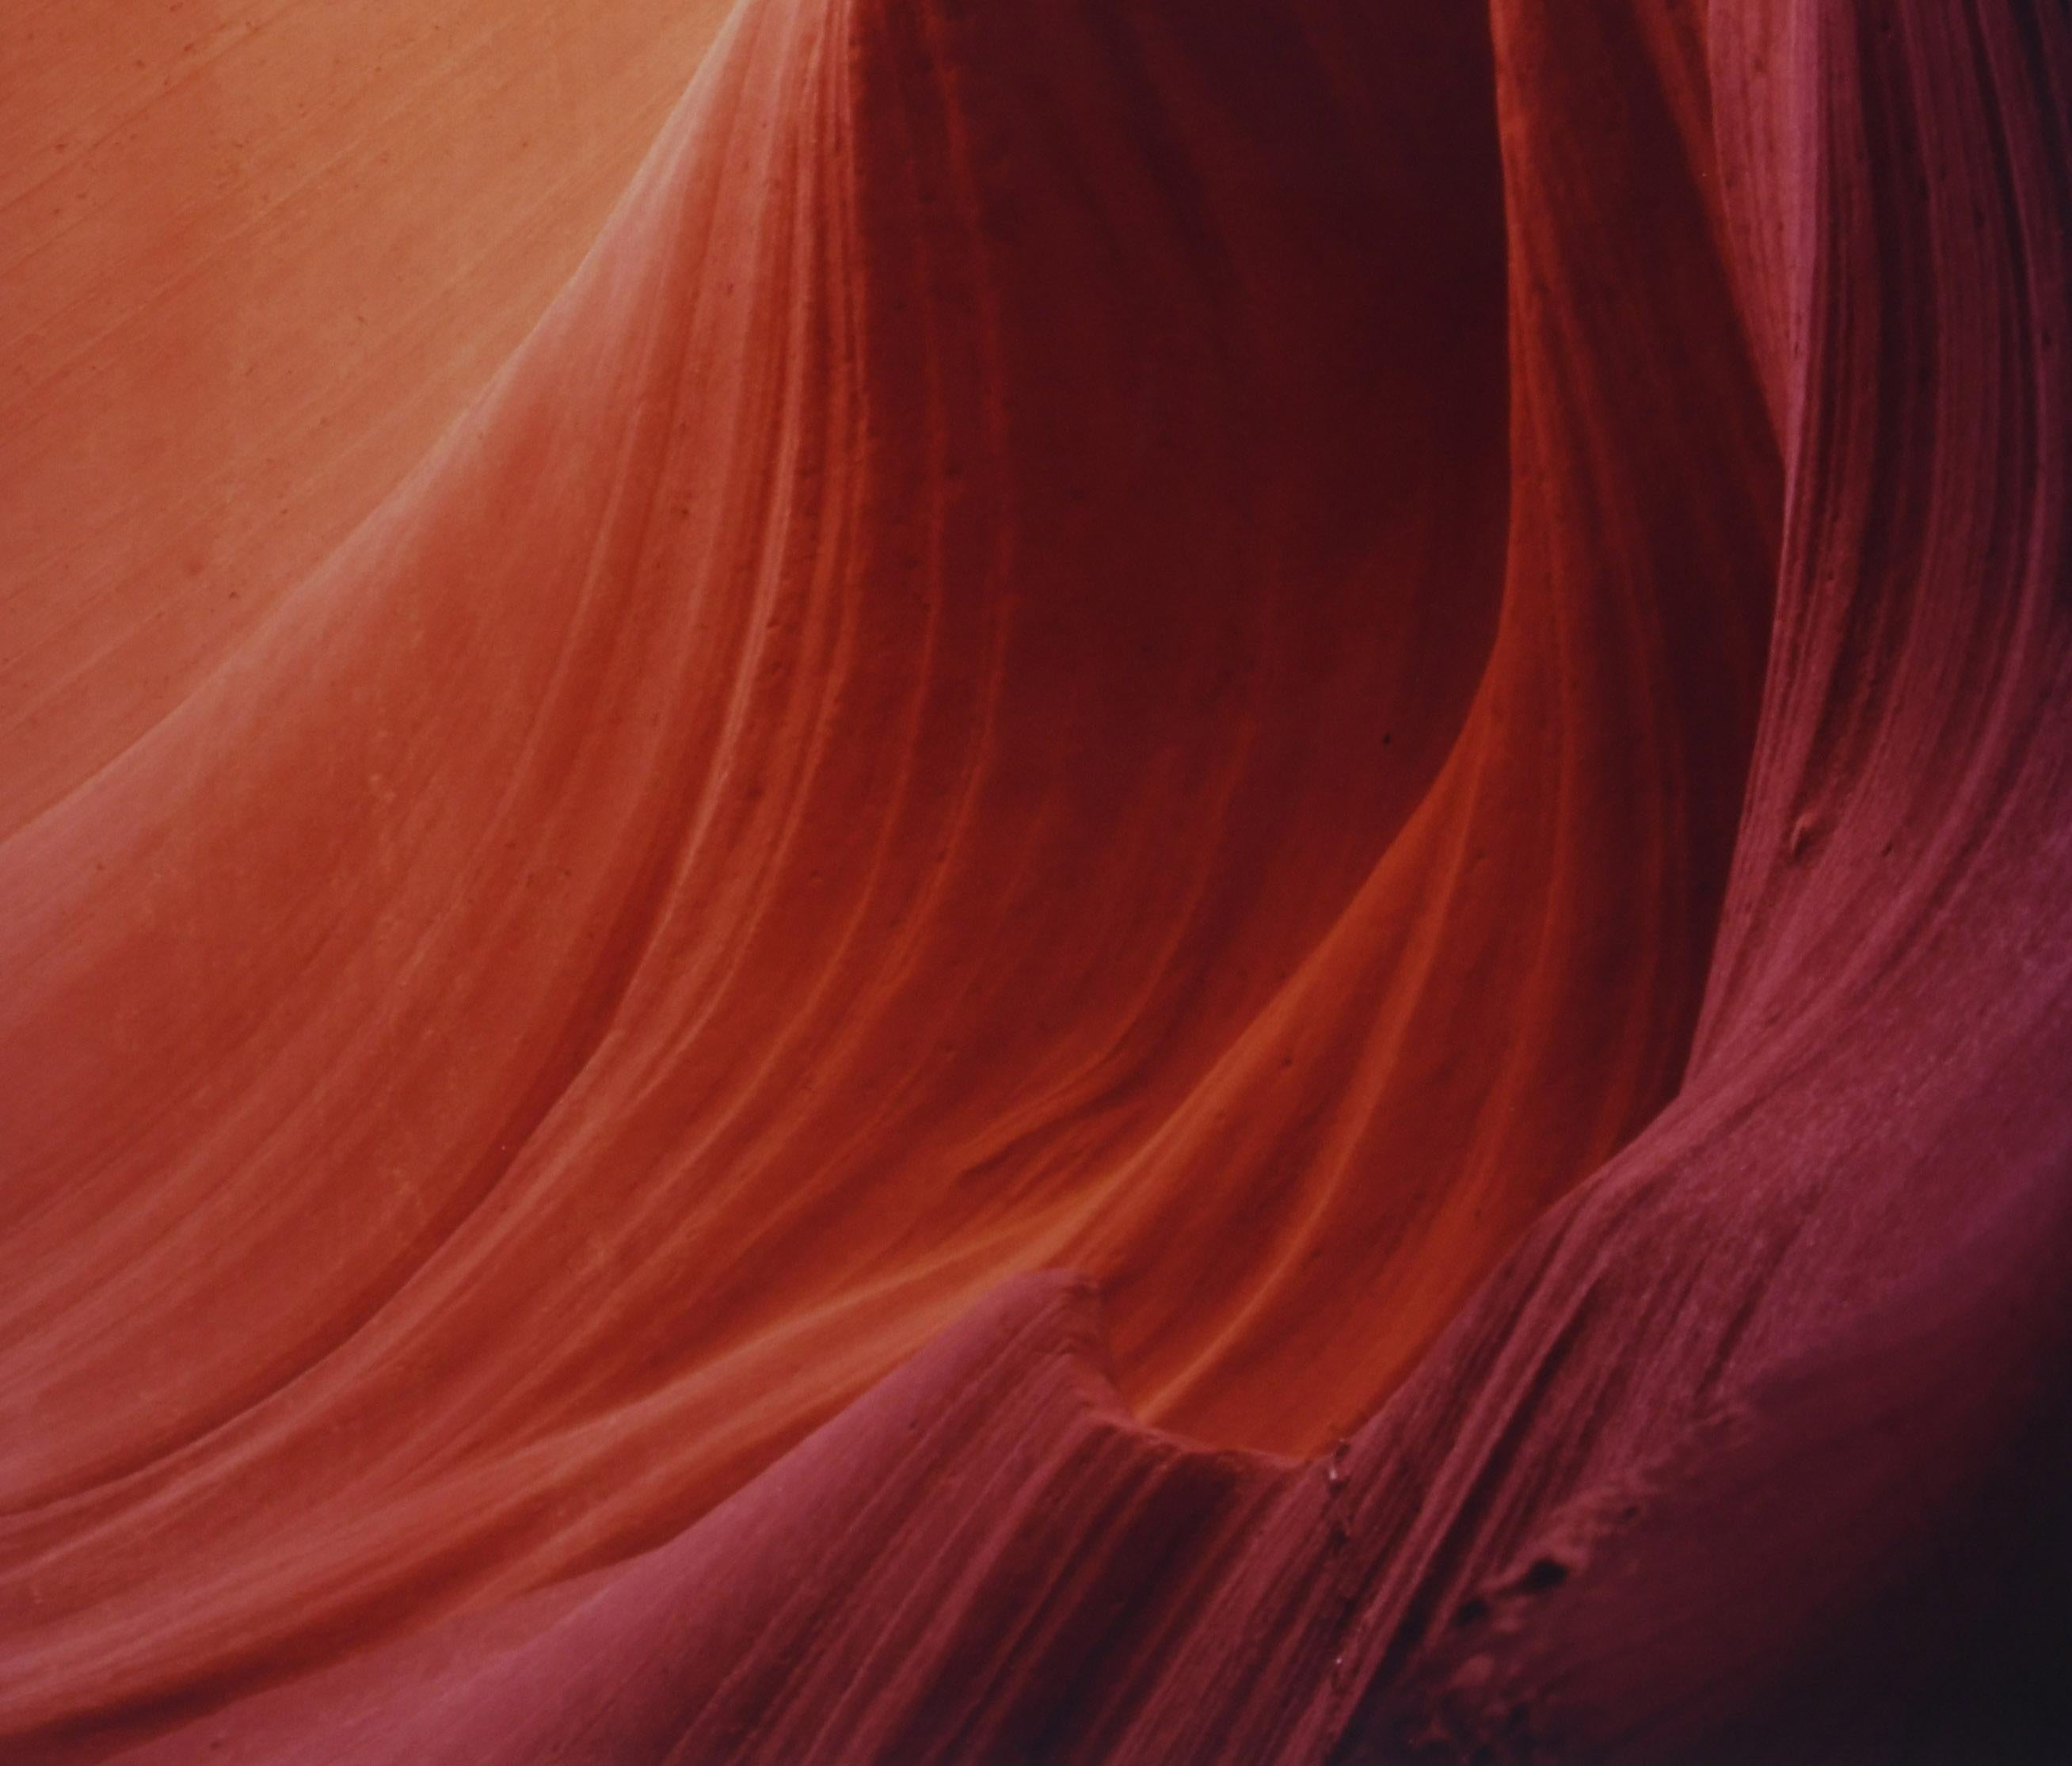 Antelope Canyon, Arizona
Color photograph, n.d.
Signed in ink on verso (see photo)
Titled, numbered on verso (see photo)
Edition: 50 (2/50)
Shaped by millions of years of water and wind erosion, the magnificent canyon was named for the herds of